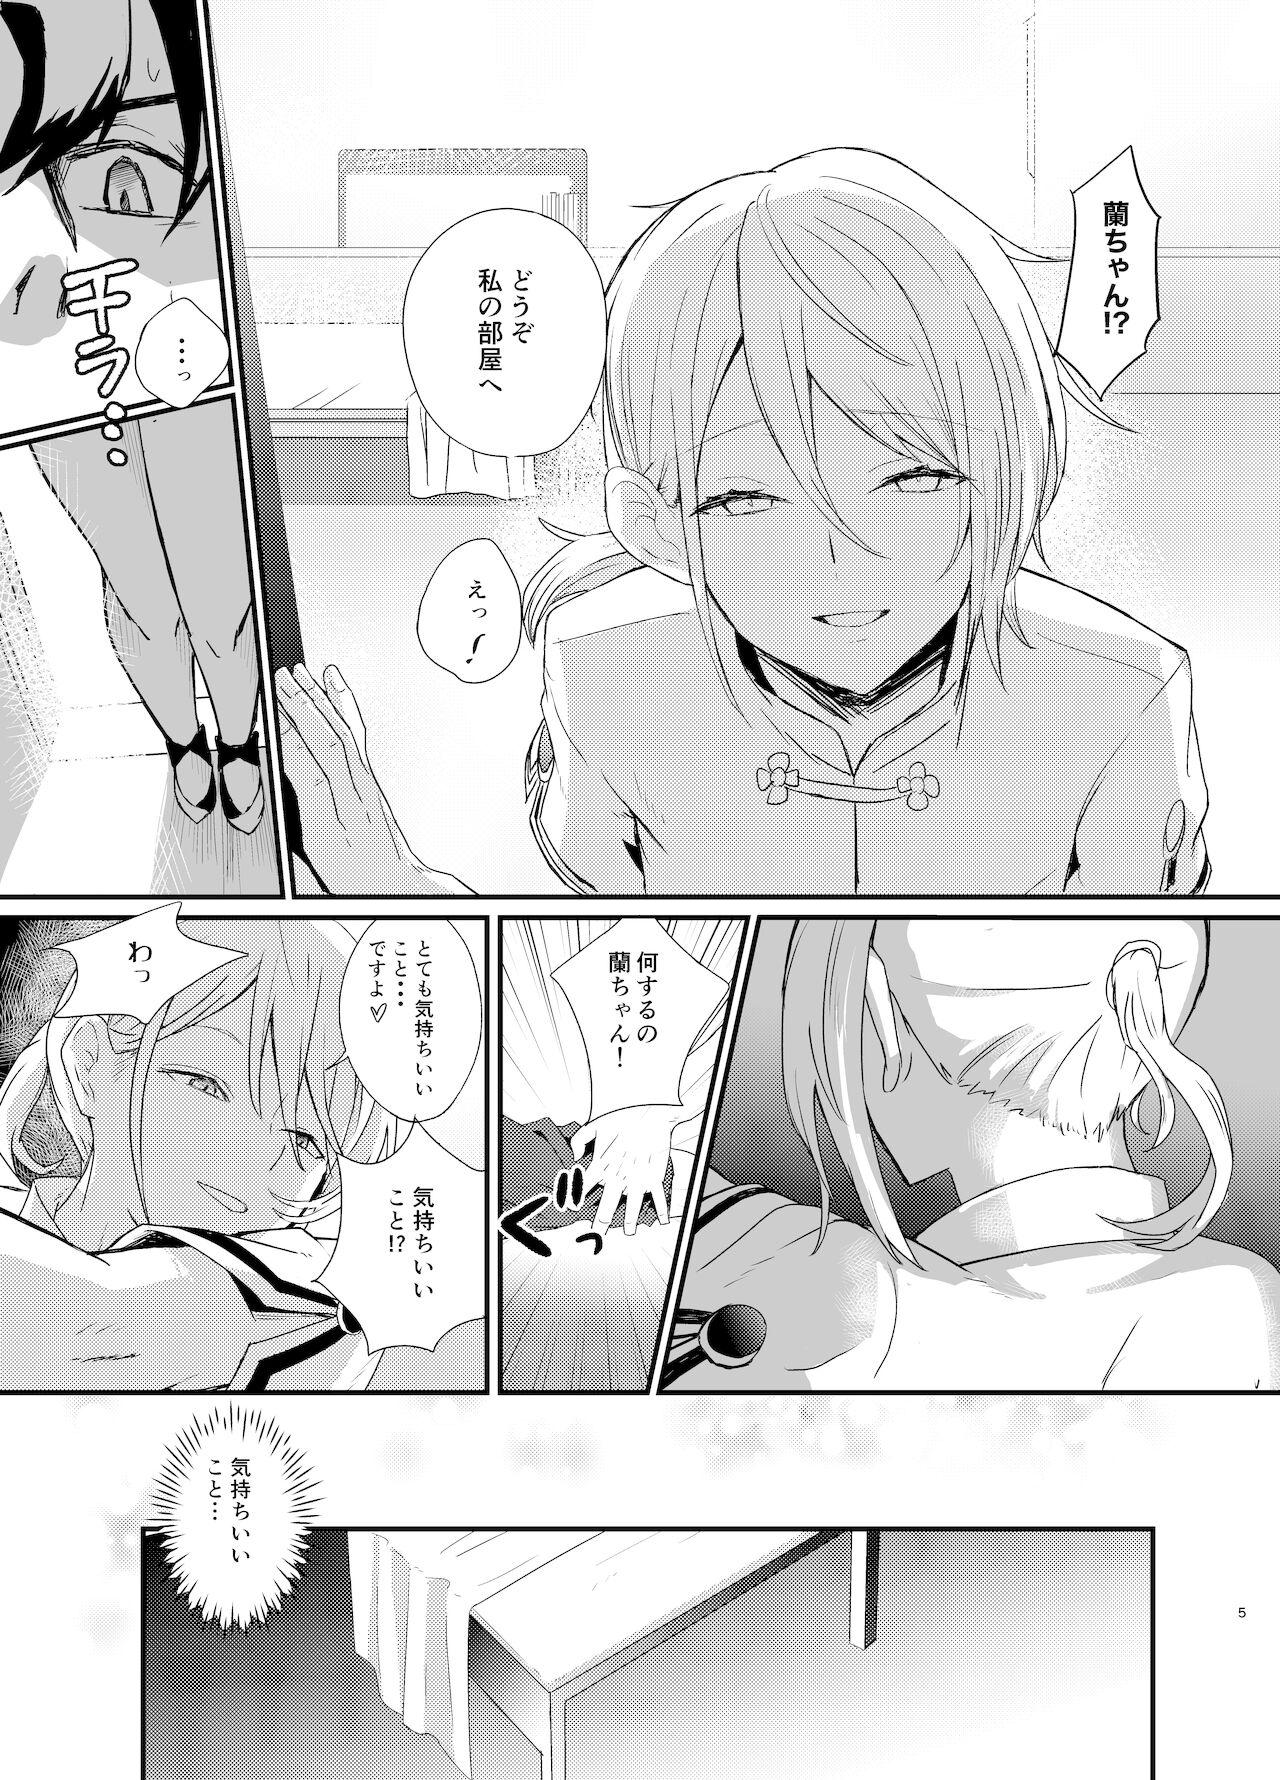 Ngentot 蘭陵王NTRゆうわく作戦! - Fate grand order Perverted - Page 6